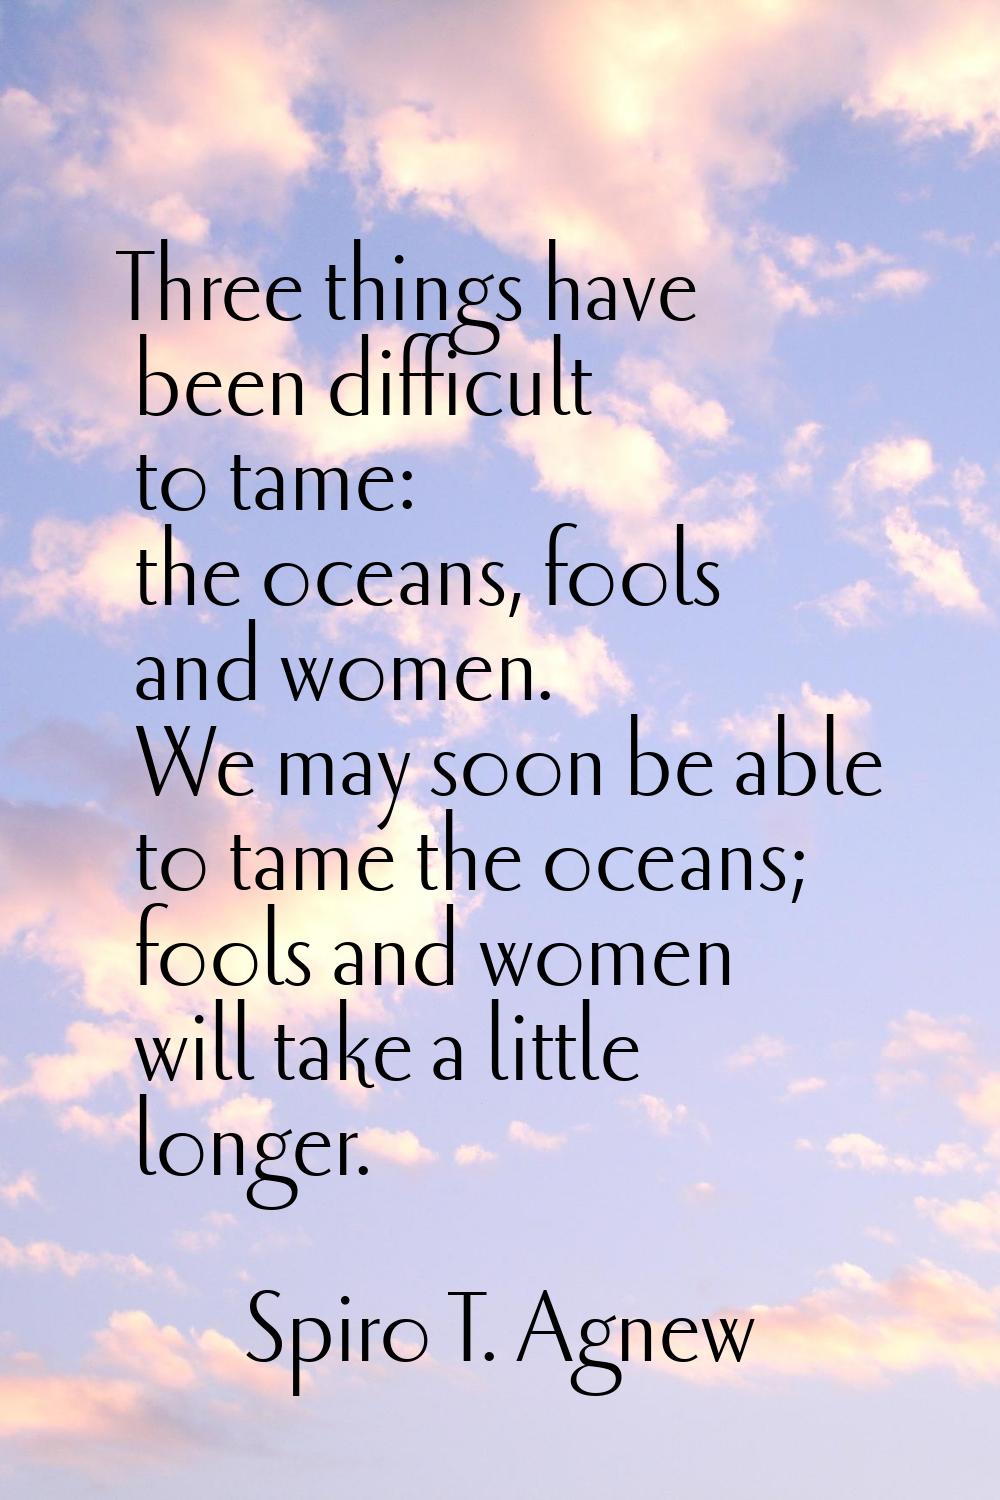 Three things have been difficult to tame: the oceans, fools and women. We may soon be able to tame 